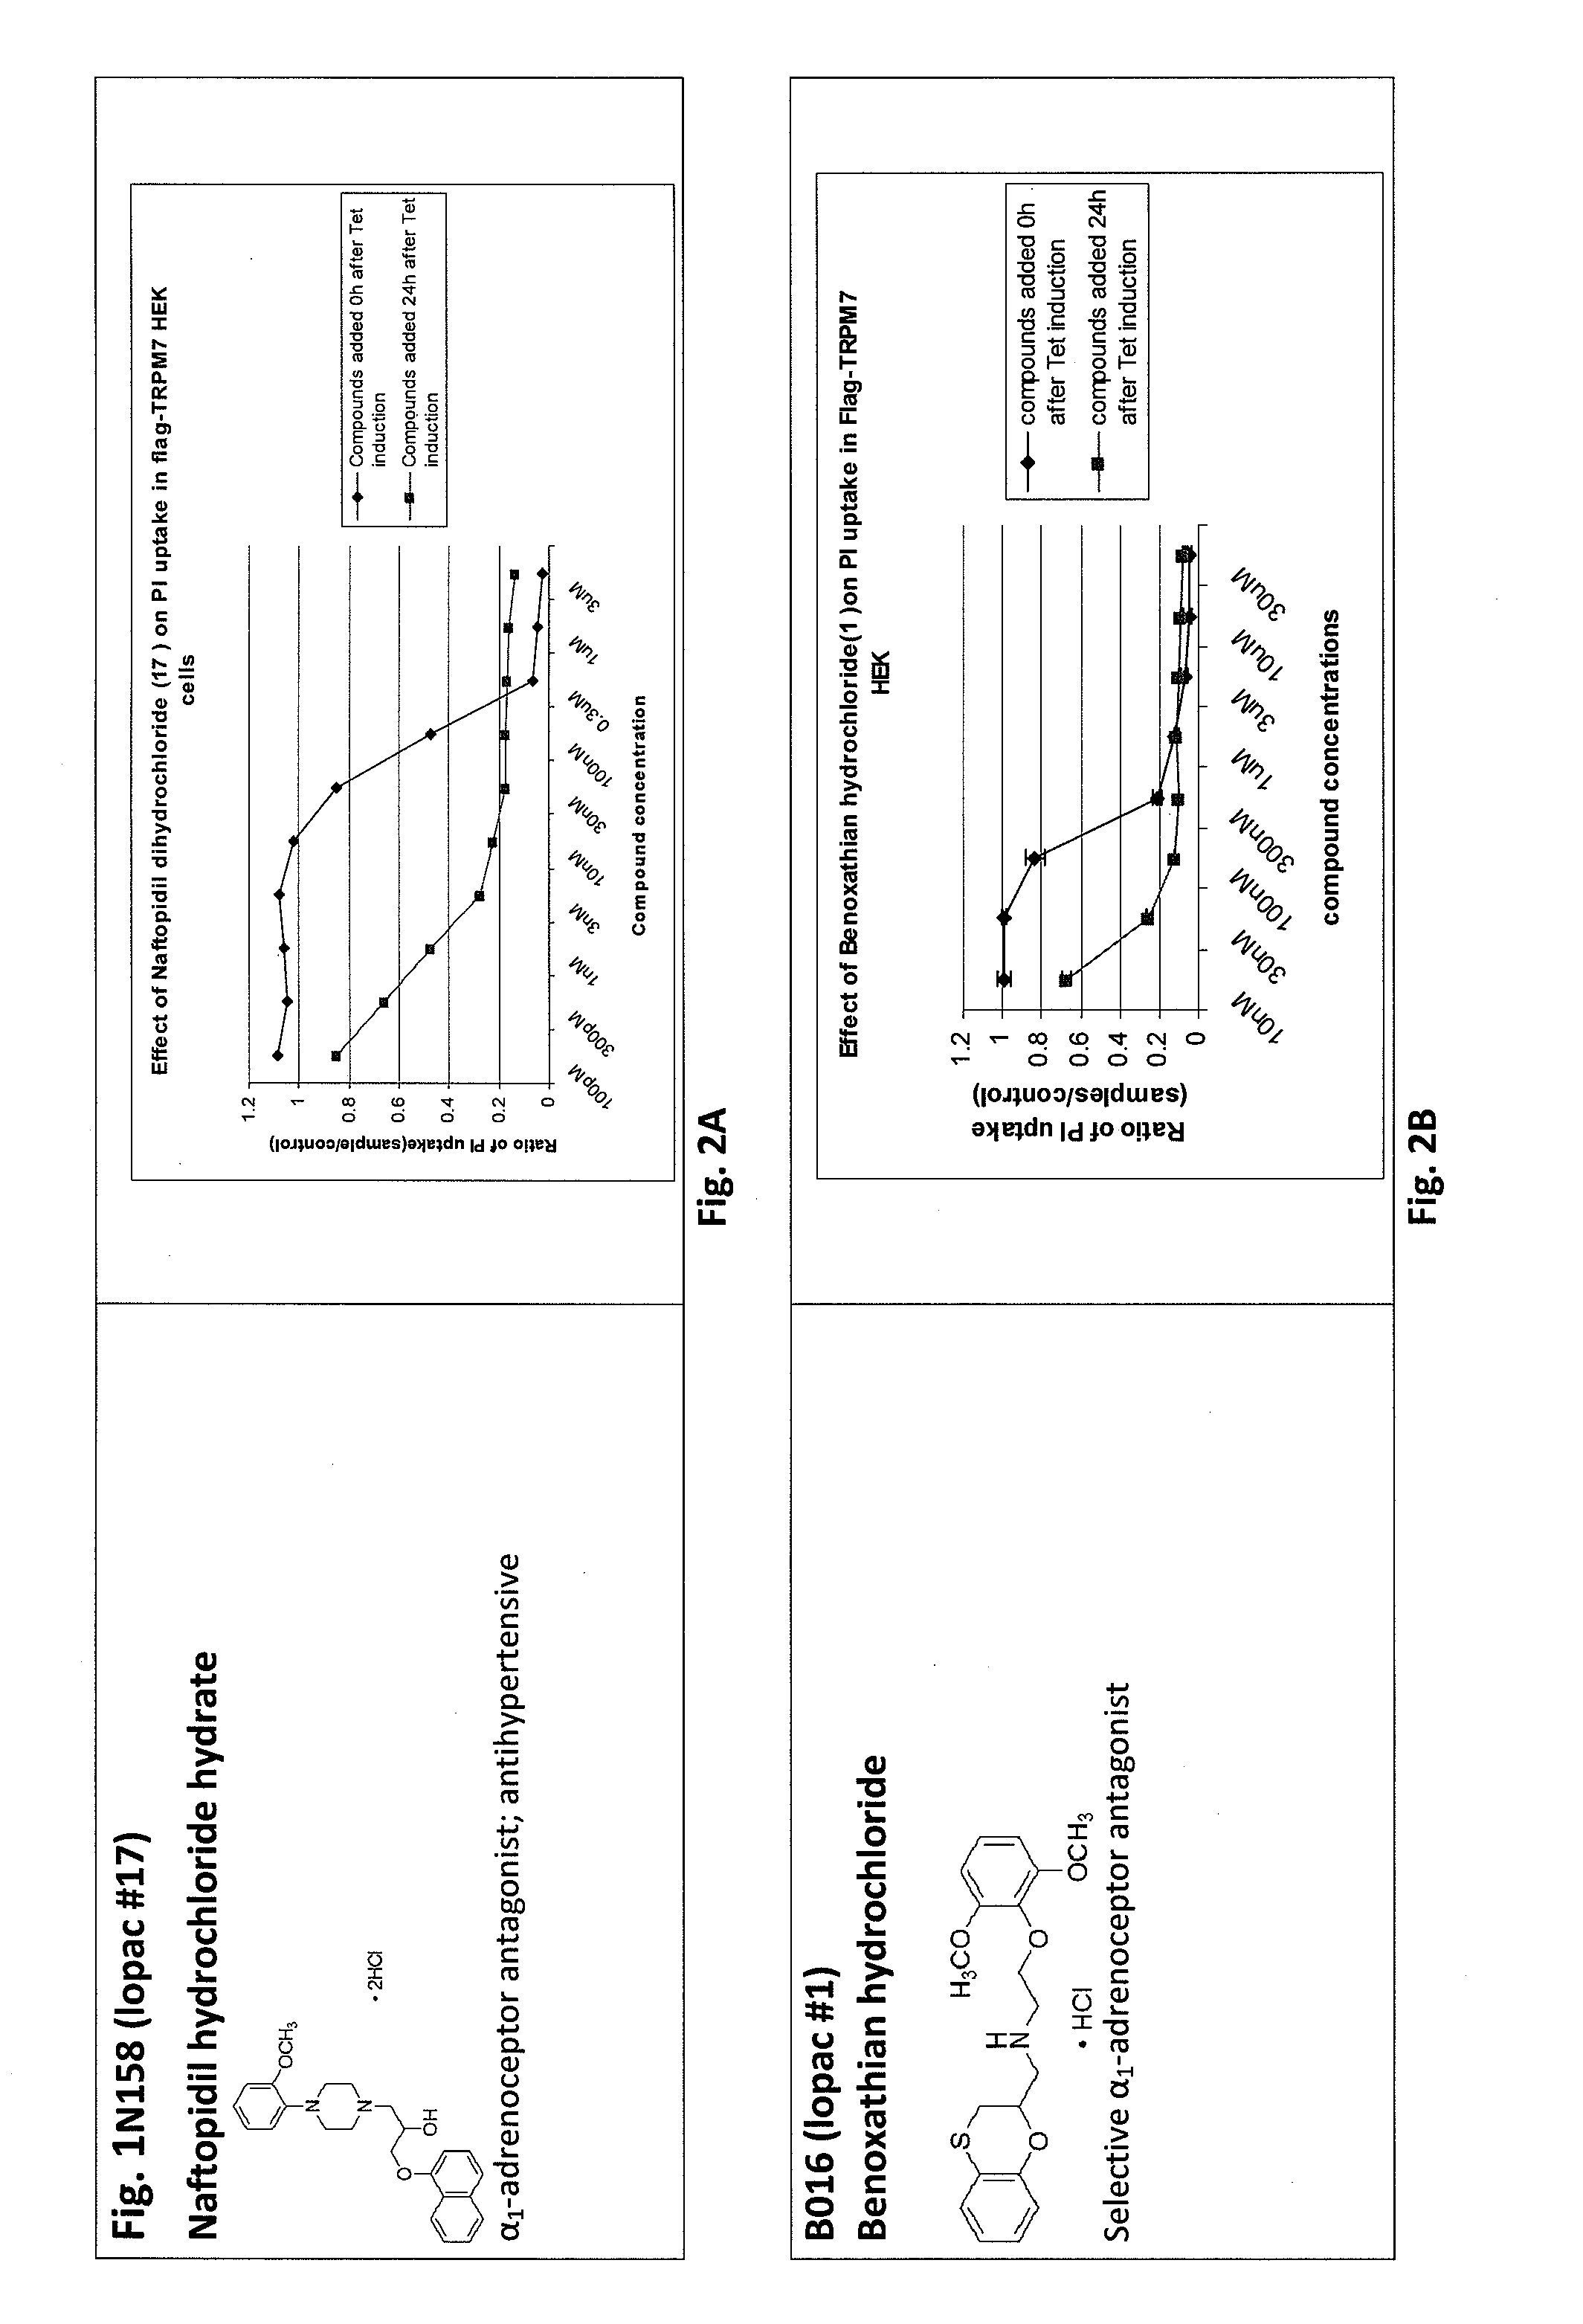 Agents and methods for treating ischemic and other diseases